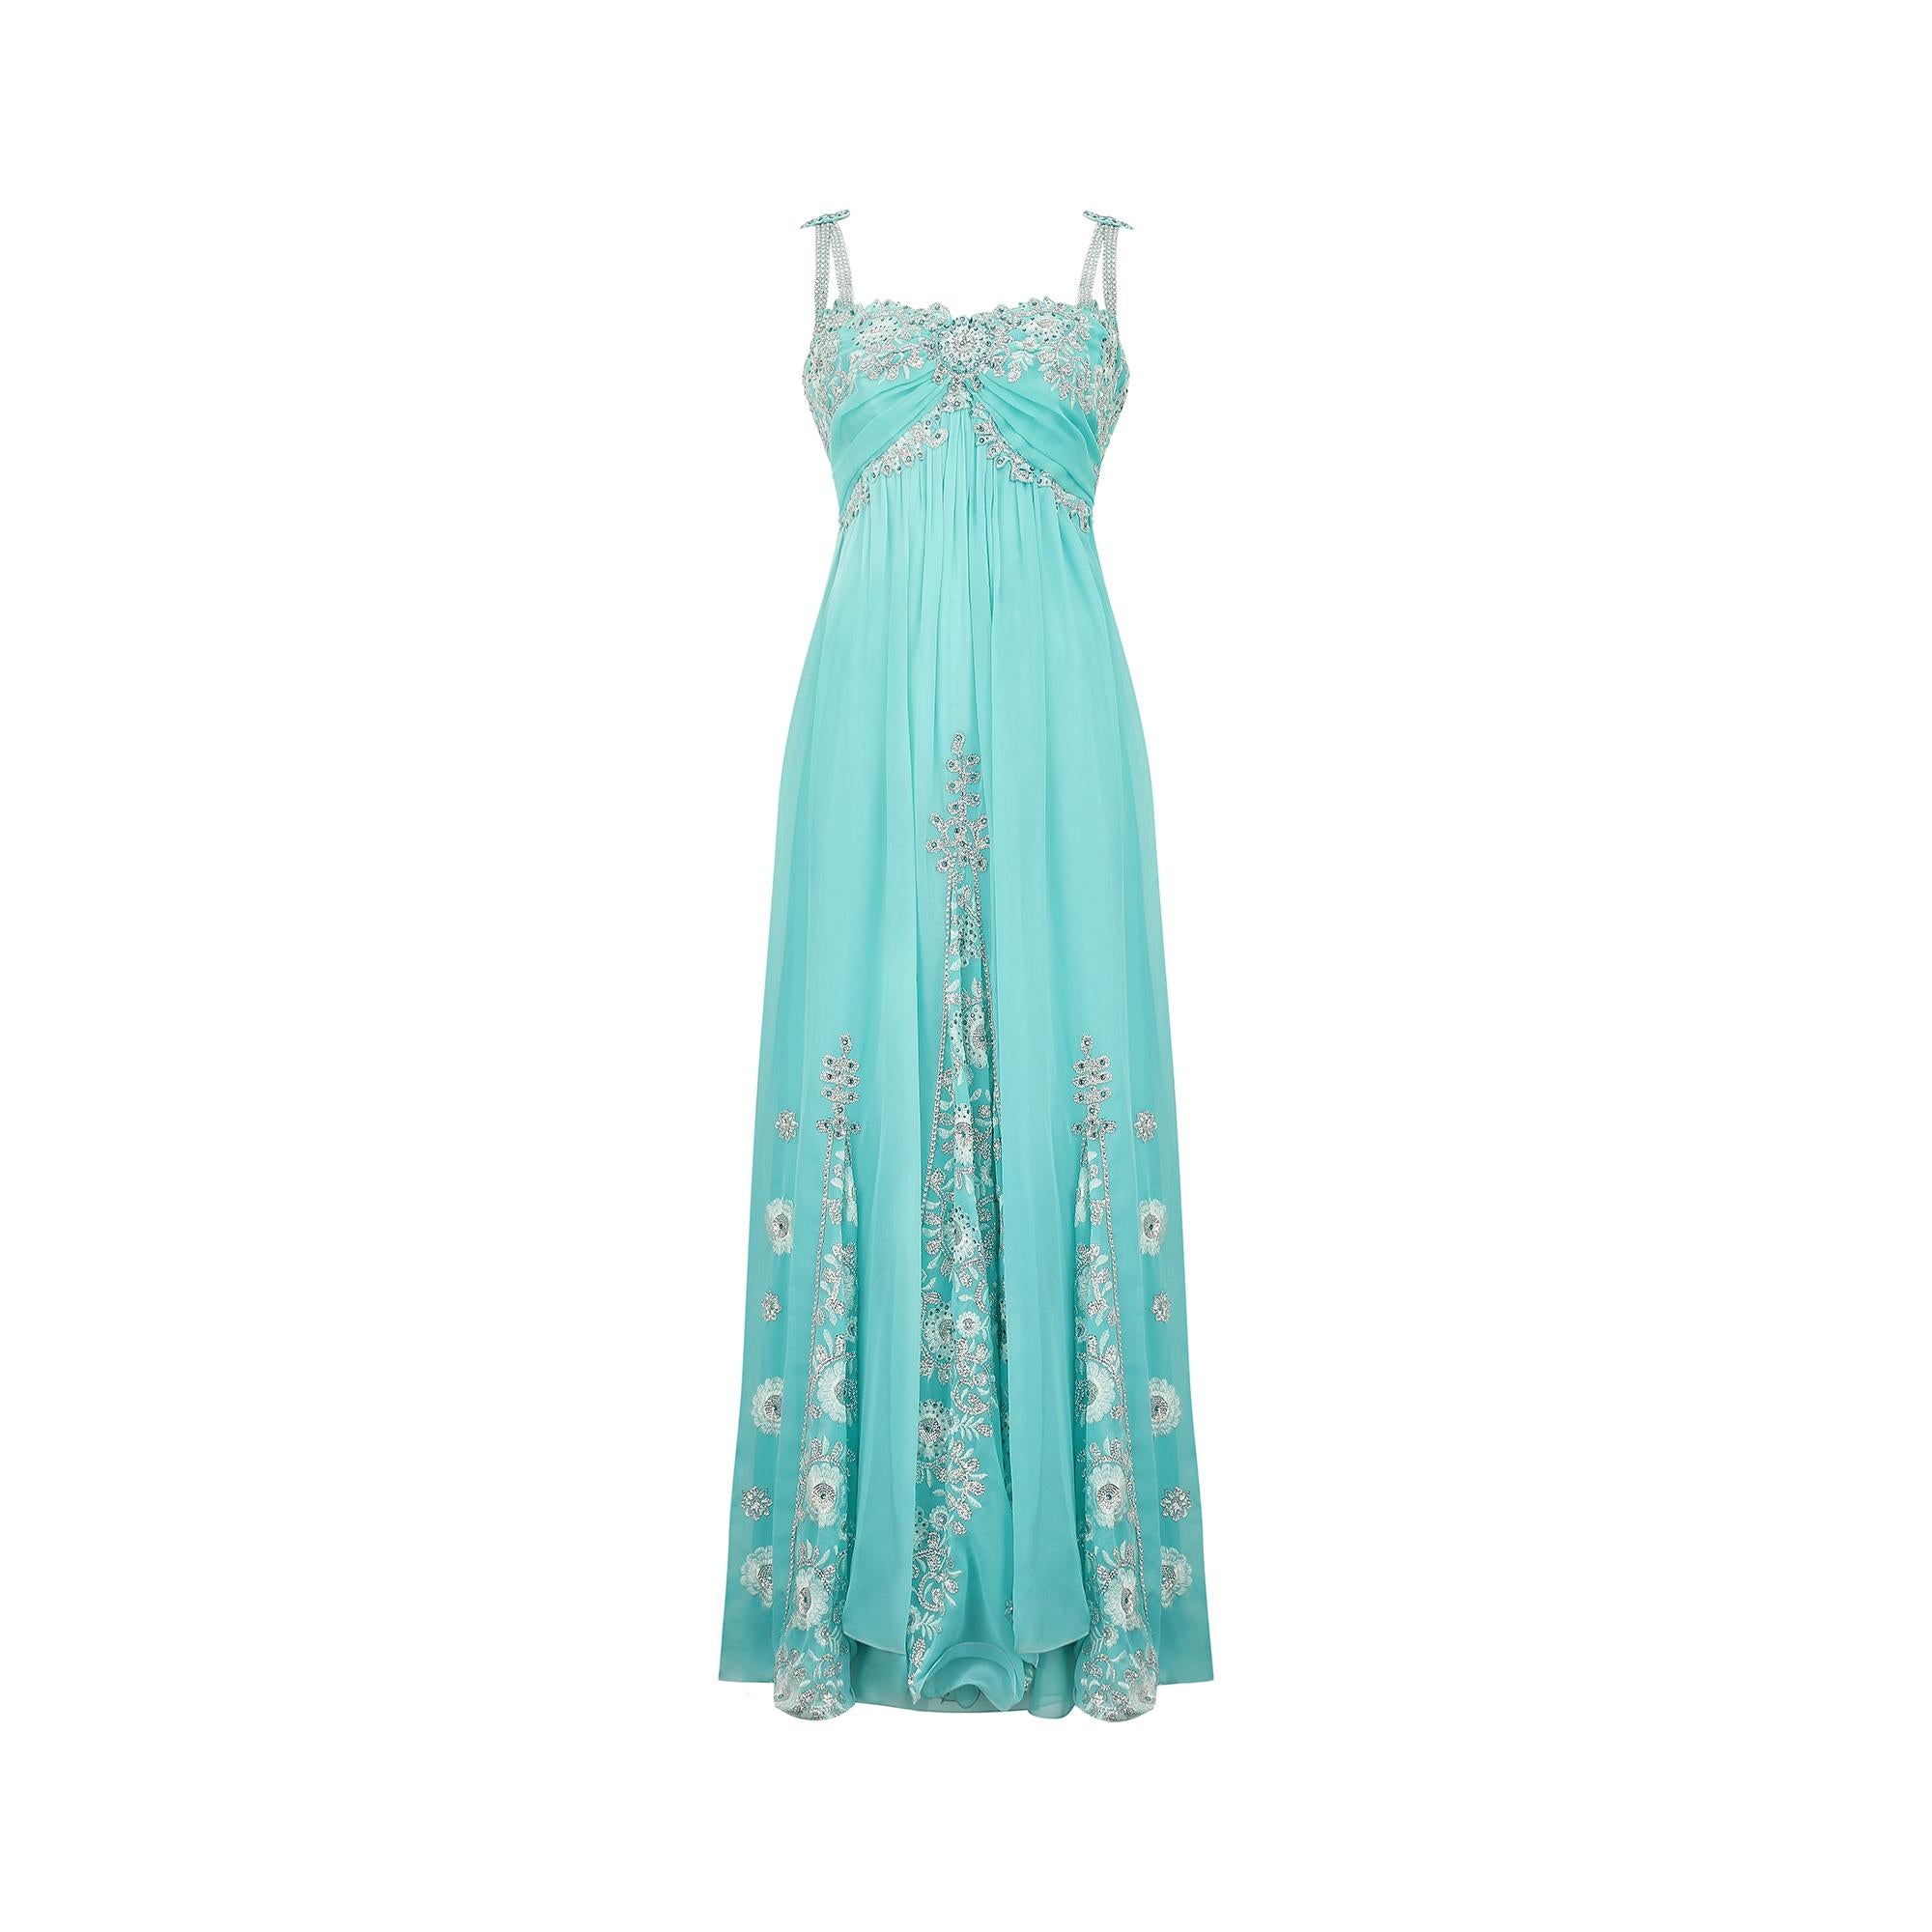 This 1990s bespoke made intricately decorated gown is crafted from the most stunning ombre shades of turquoise manmade chiffon. It features a fitted bodice with internal boning for extra shape and support. The top section has a classic sweetheart